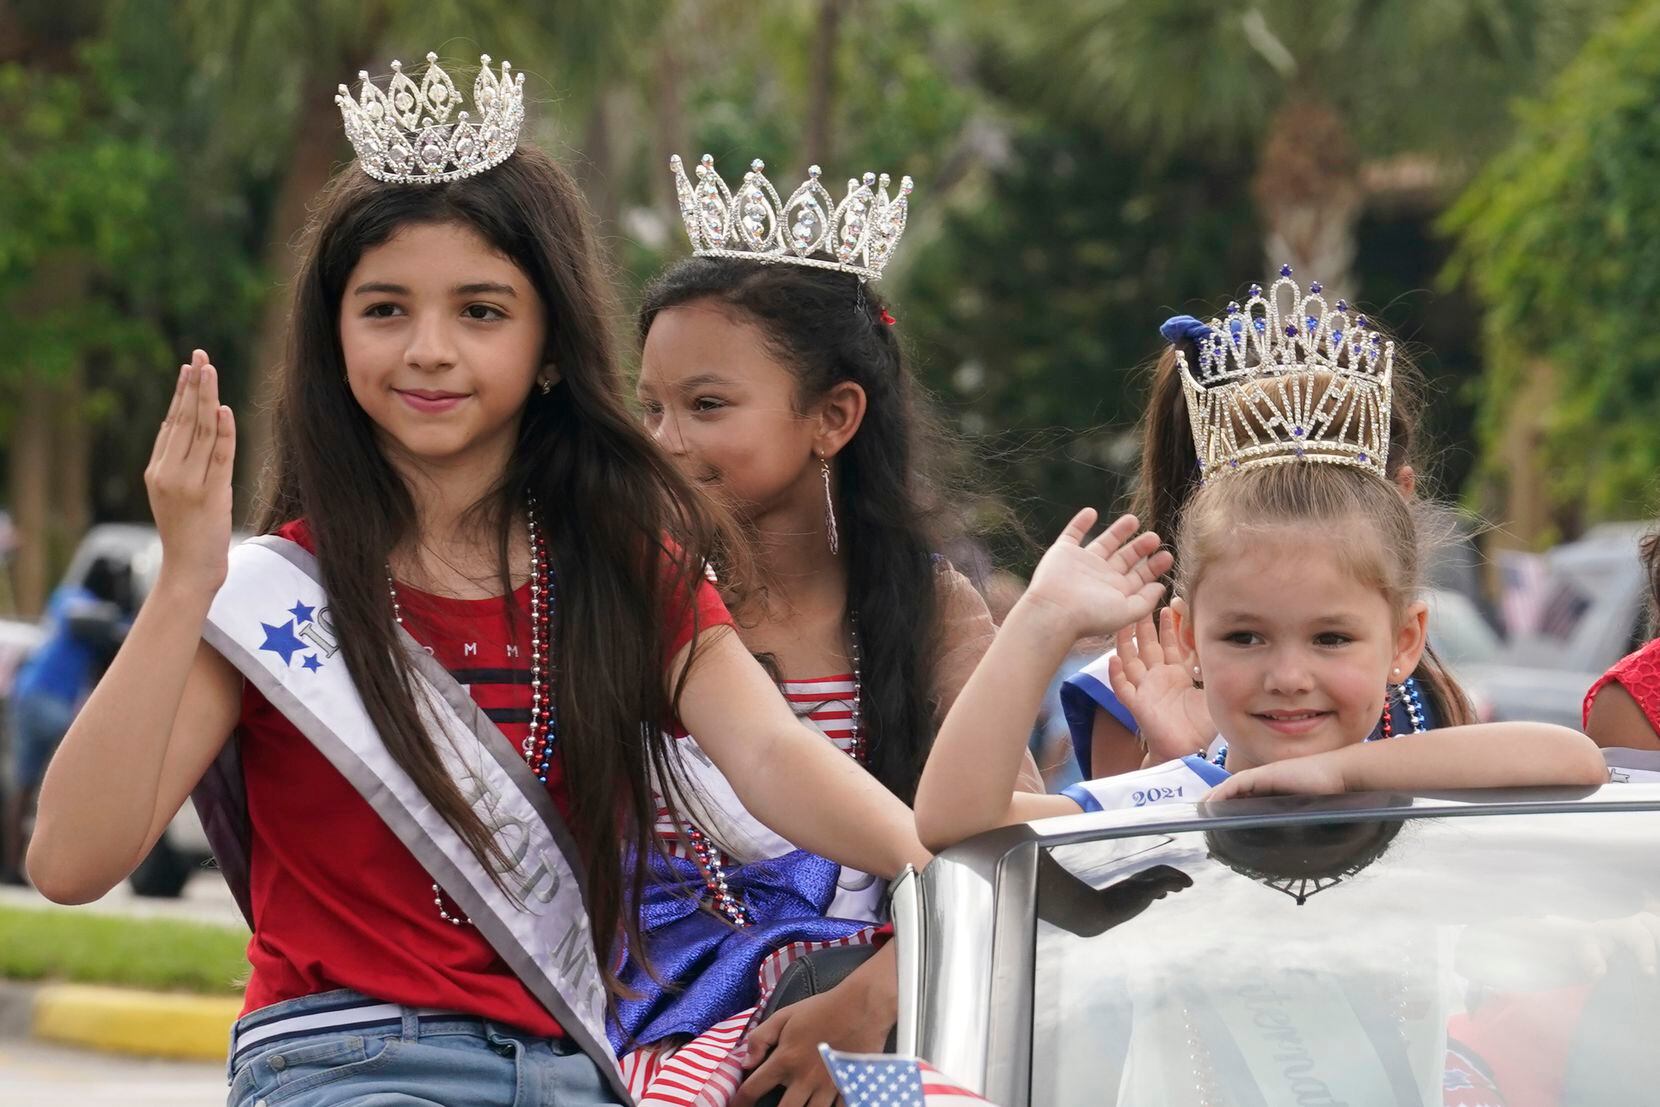 Members of the Florida International Girl pageant group waved during a Fourth of July parade...